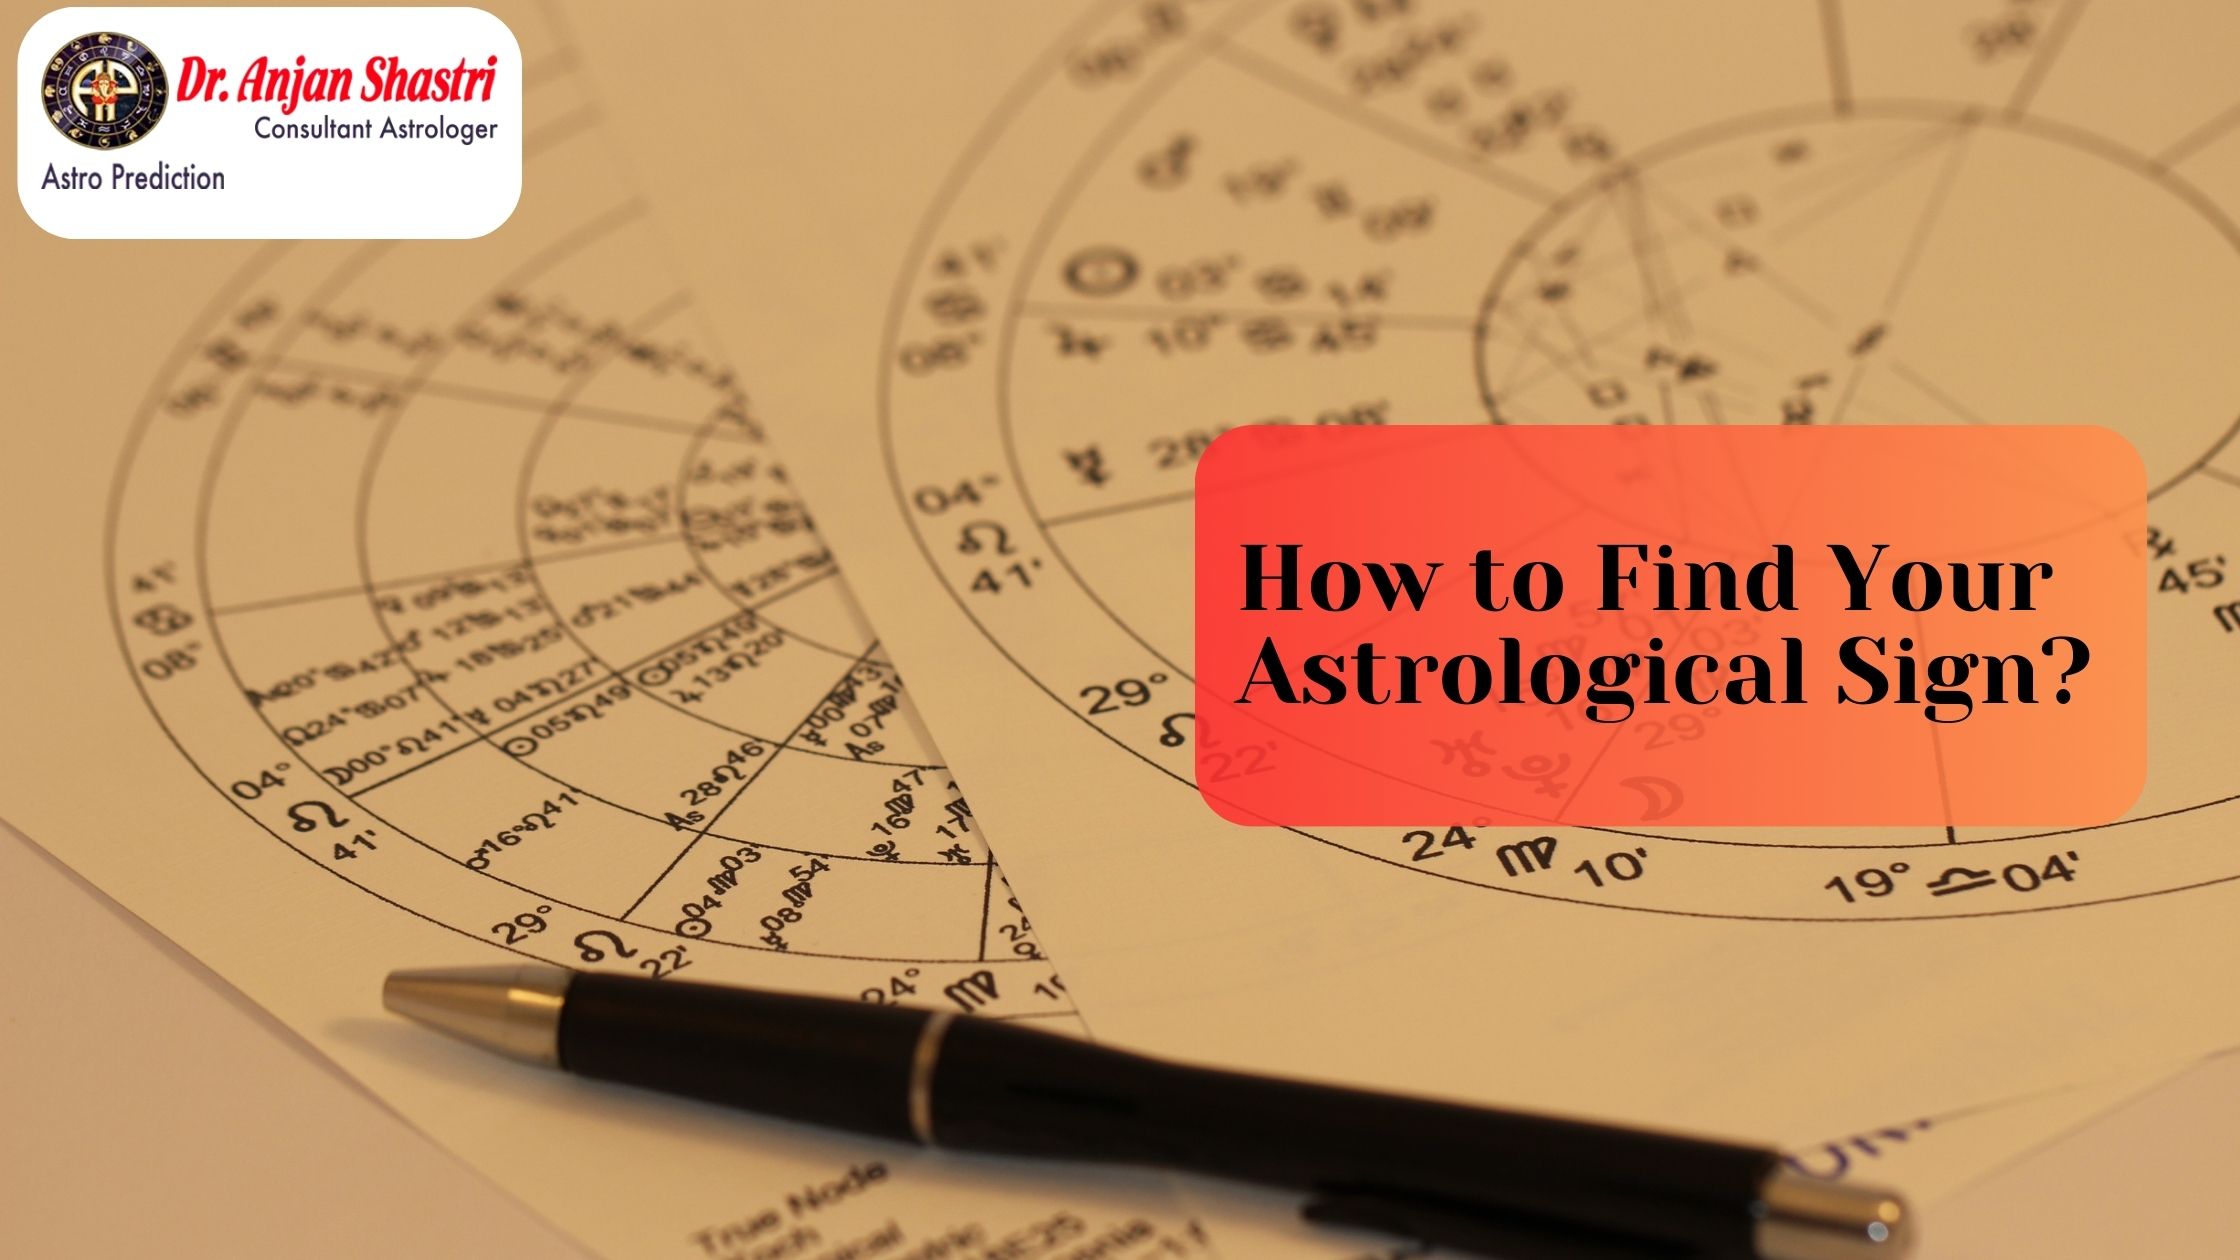 How to Find Your Astrological Sign?